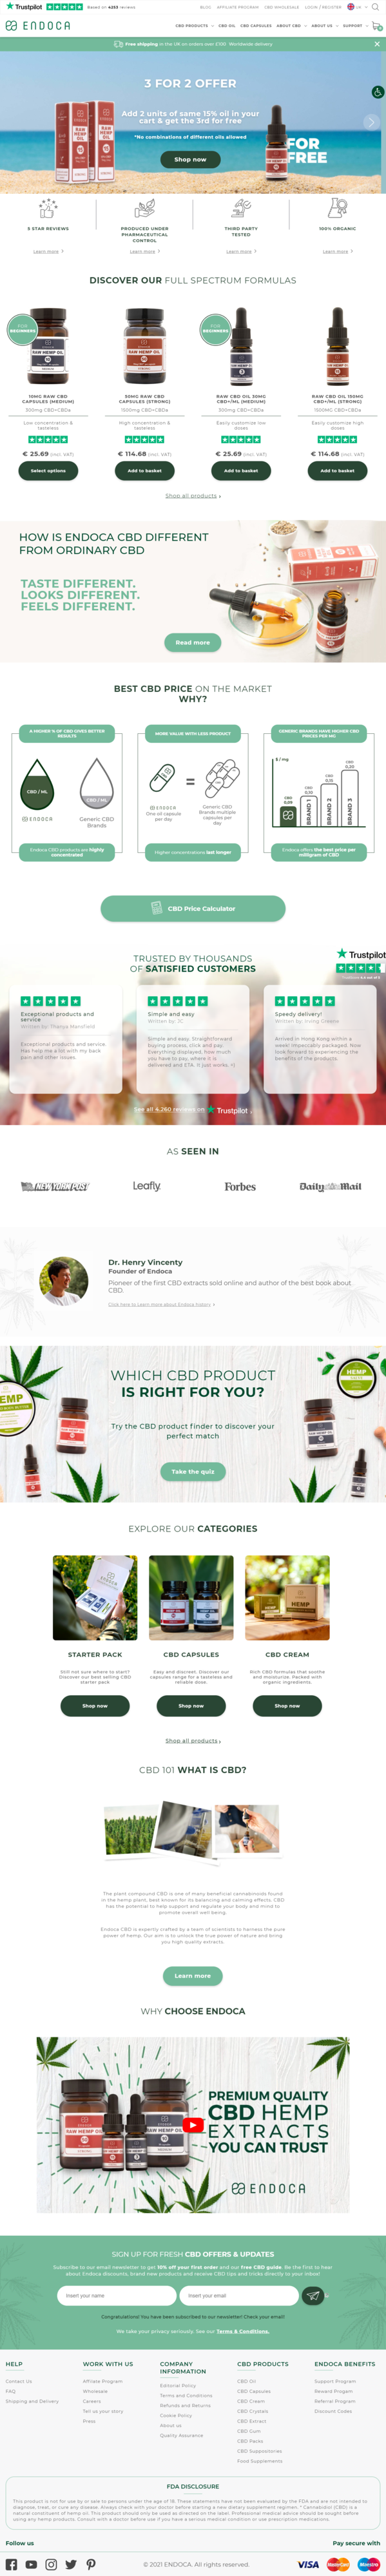 - CBD Oil For Sale - Buy CBD Online - CBD For Your Every Need - Endoca_ - www.endoca.com.png